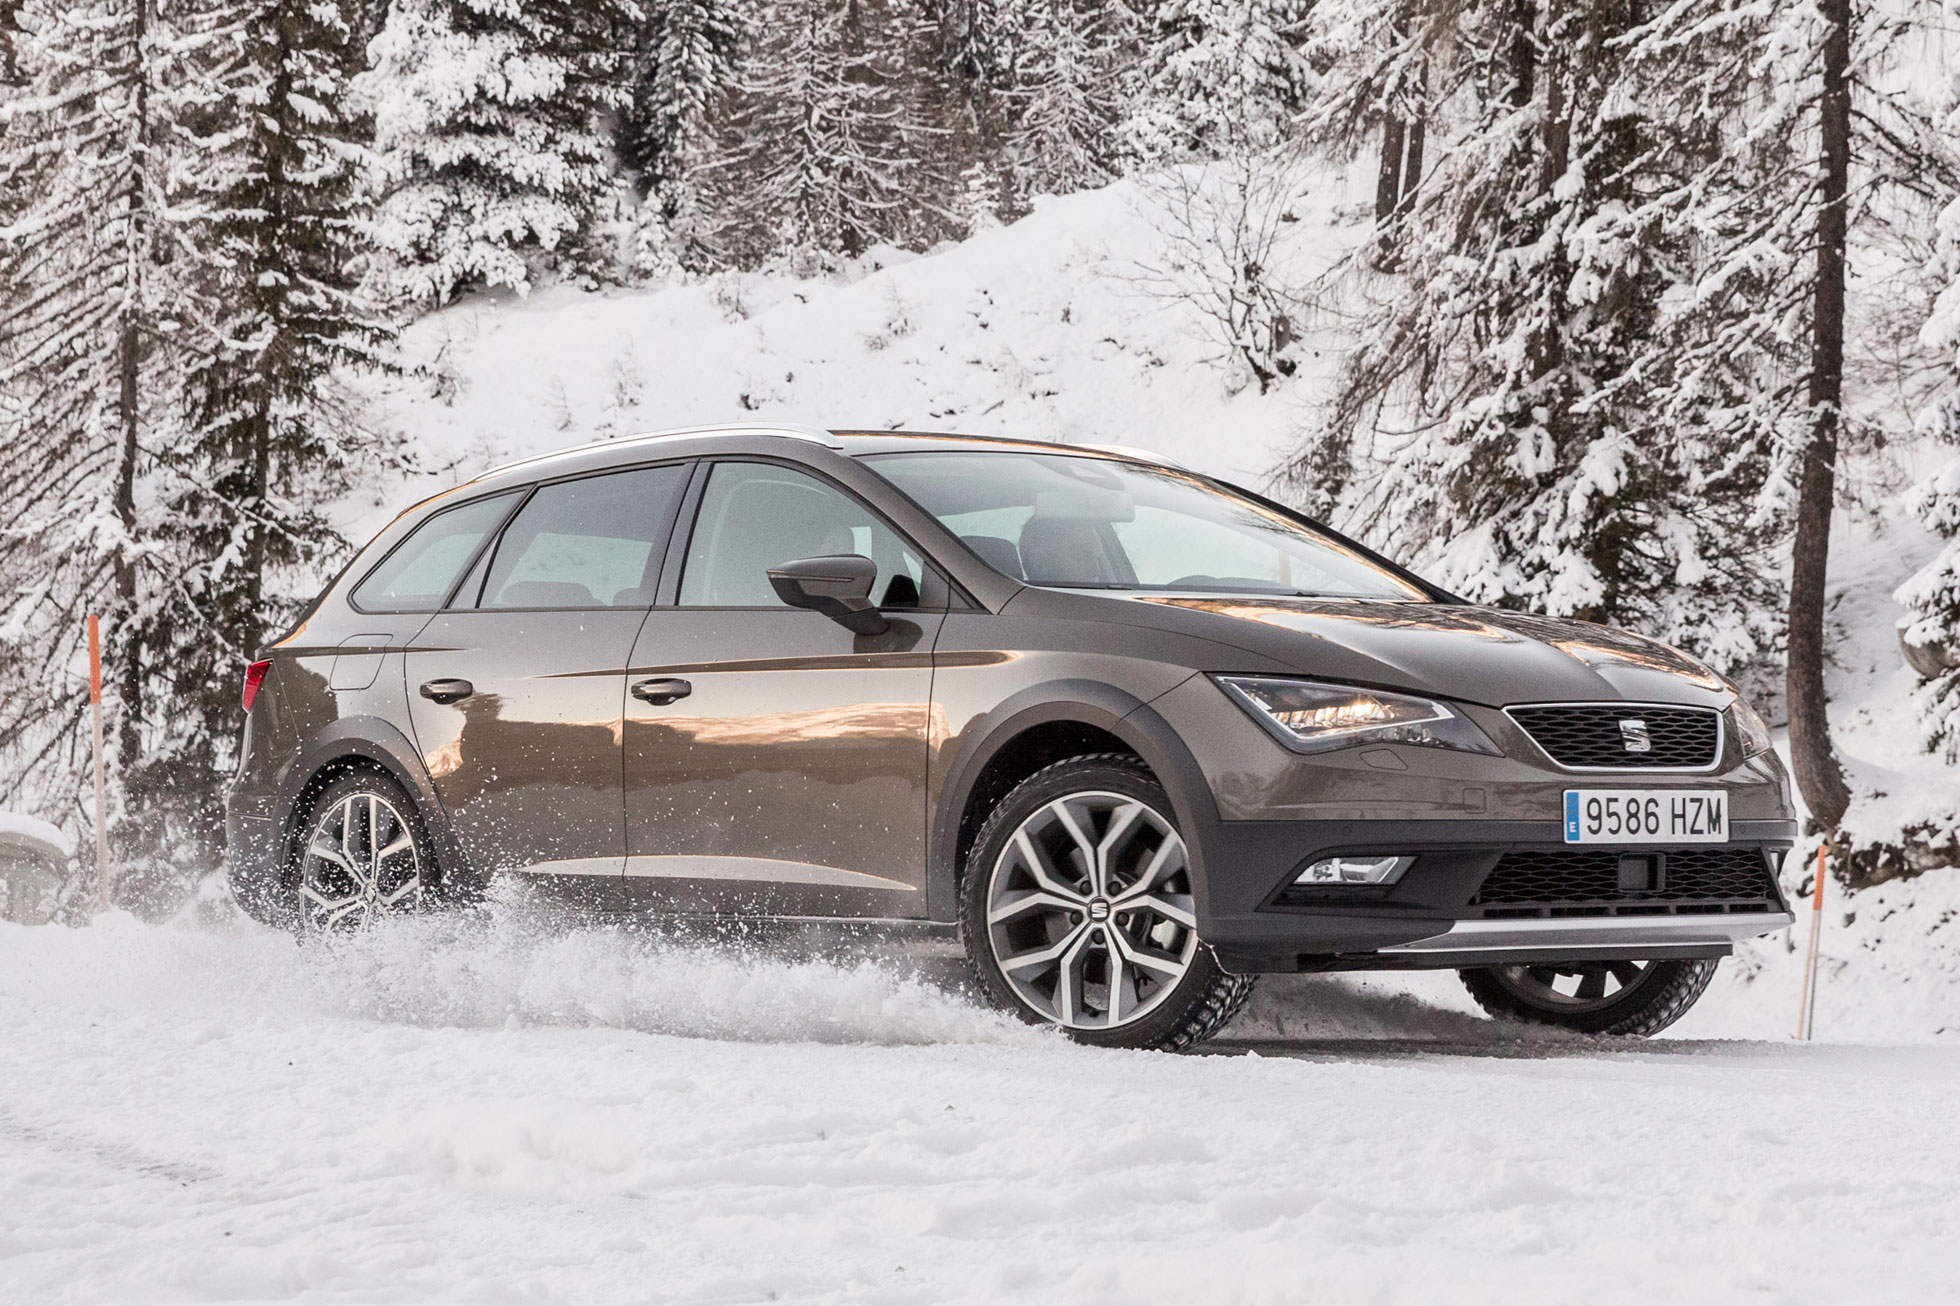 The SEAT Leon X-Perience can practically drive itself